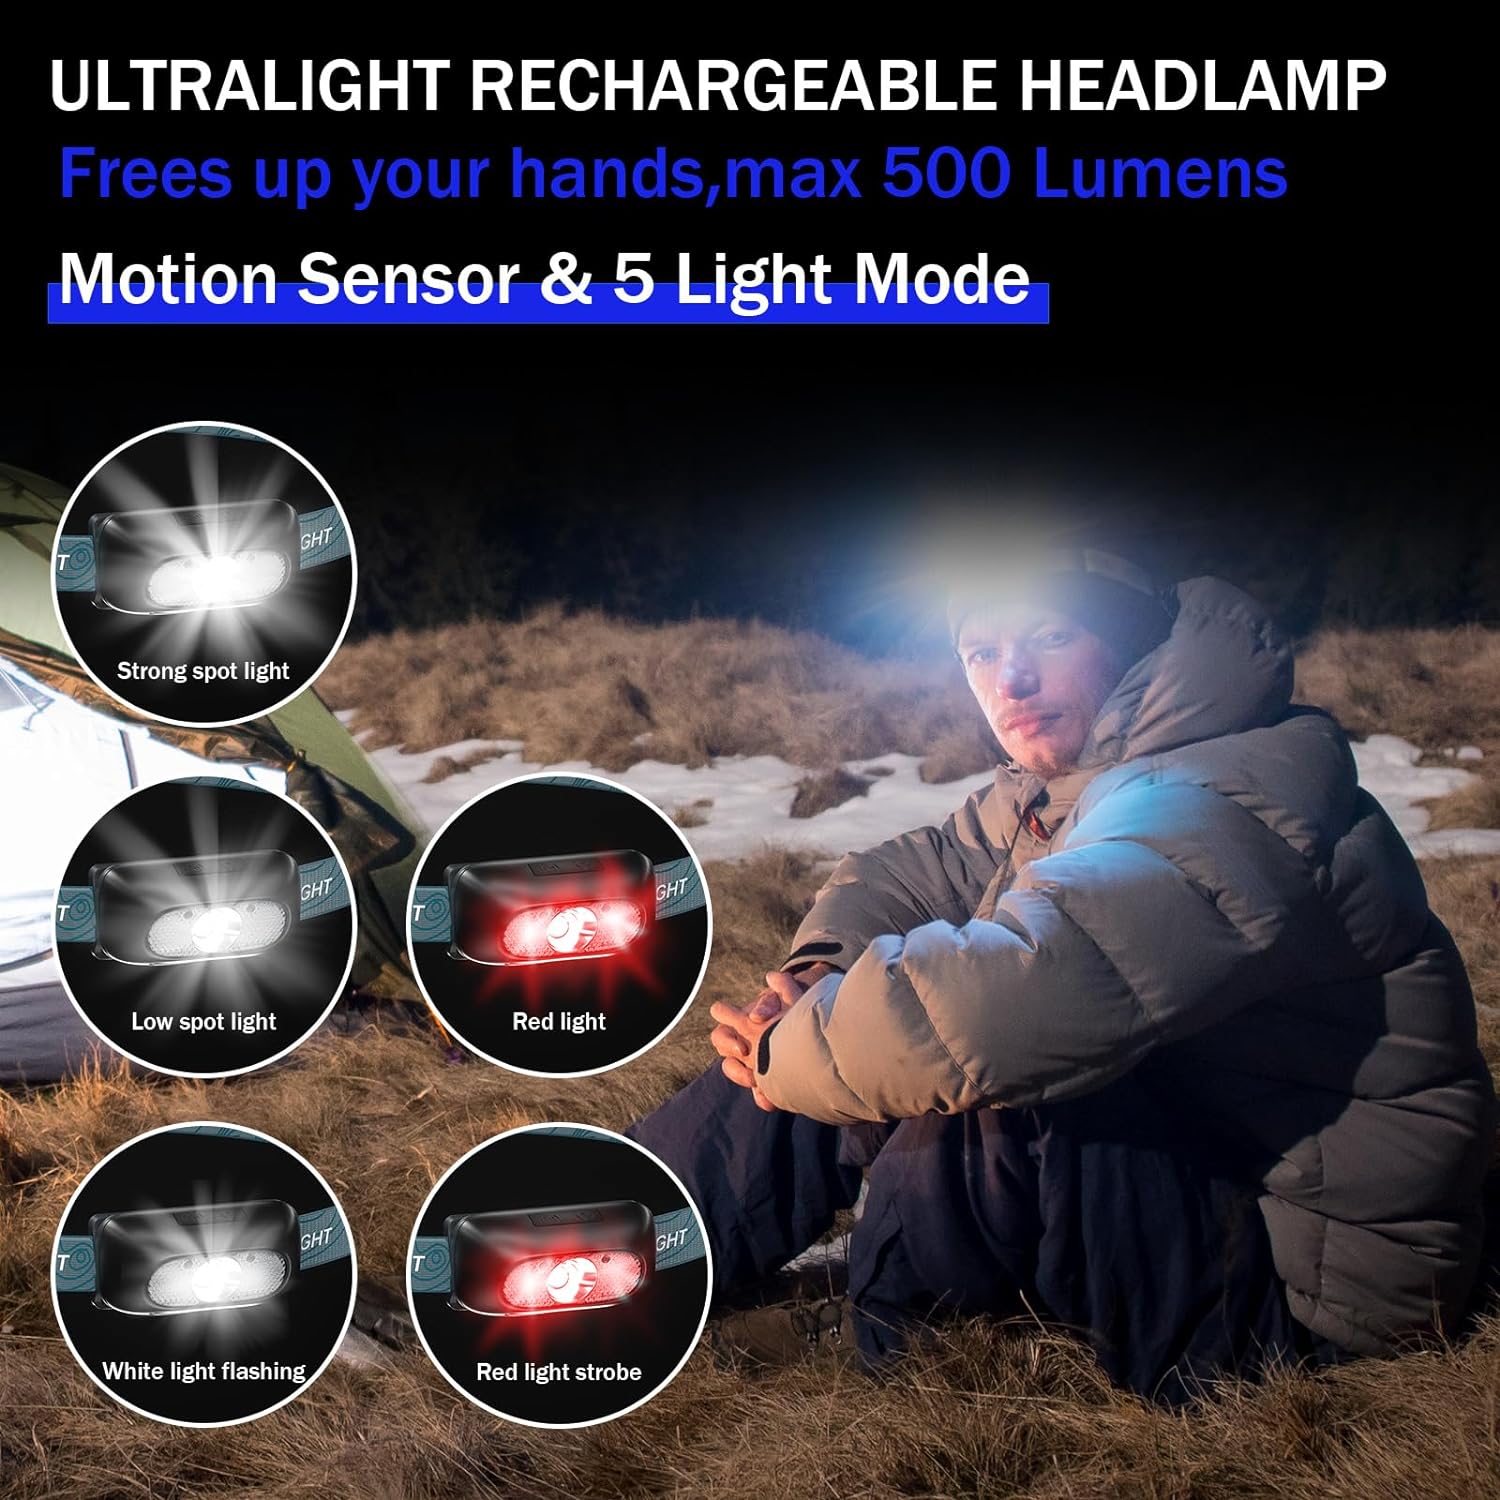 MOKURA Rechargeable Led Flashlight High Lumens with Headlamp, 90000 Lumen USB C Flashlights Emergency, Waterproof Bright Zoomable Flash Light Powerful for Home Camping Hiking Fishing